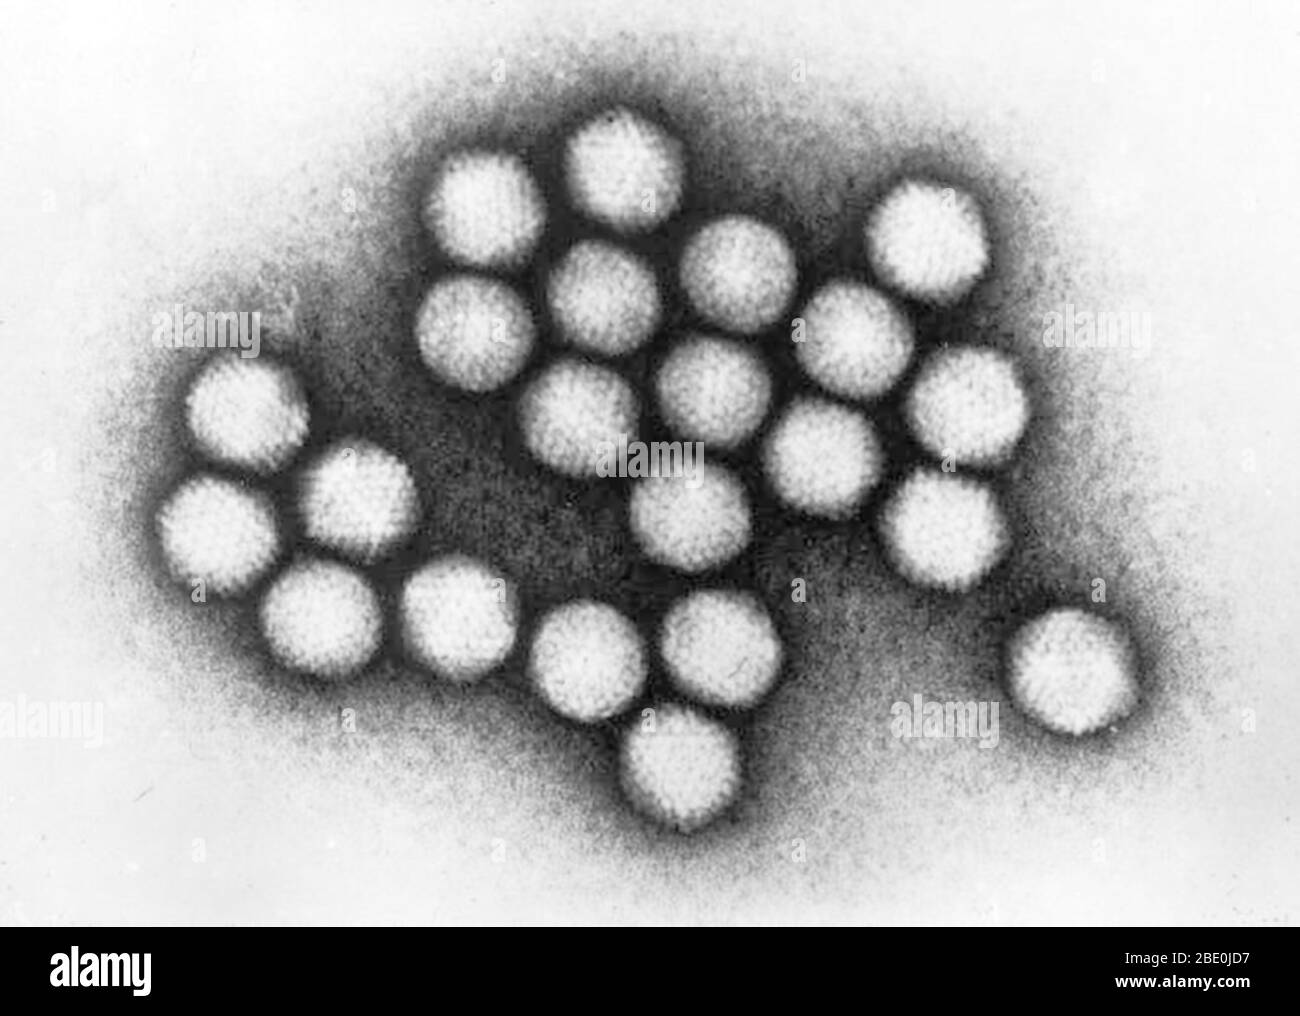 Transmission Electron Micrograph (TEM) of adenovirus particles. Adenoviruses (members of the family Adenoviridae) are nonenveloped viruses with an icosahedral nucleocapsid containing a double stranded DNA genome. Adenovirus infections most commonly cause illness of the respiratory system; however, depending on the infecting serotype, they may also cause various other illnesses and presentations. Apart from respiratory involvement, illnesses and presentations of adenovirus include gastroenteritis, conjunctivitis, cystitis, and rash illness. Symptoms of respiratory illness caused by adenovirus i Stock Photo